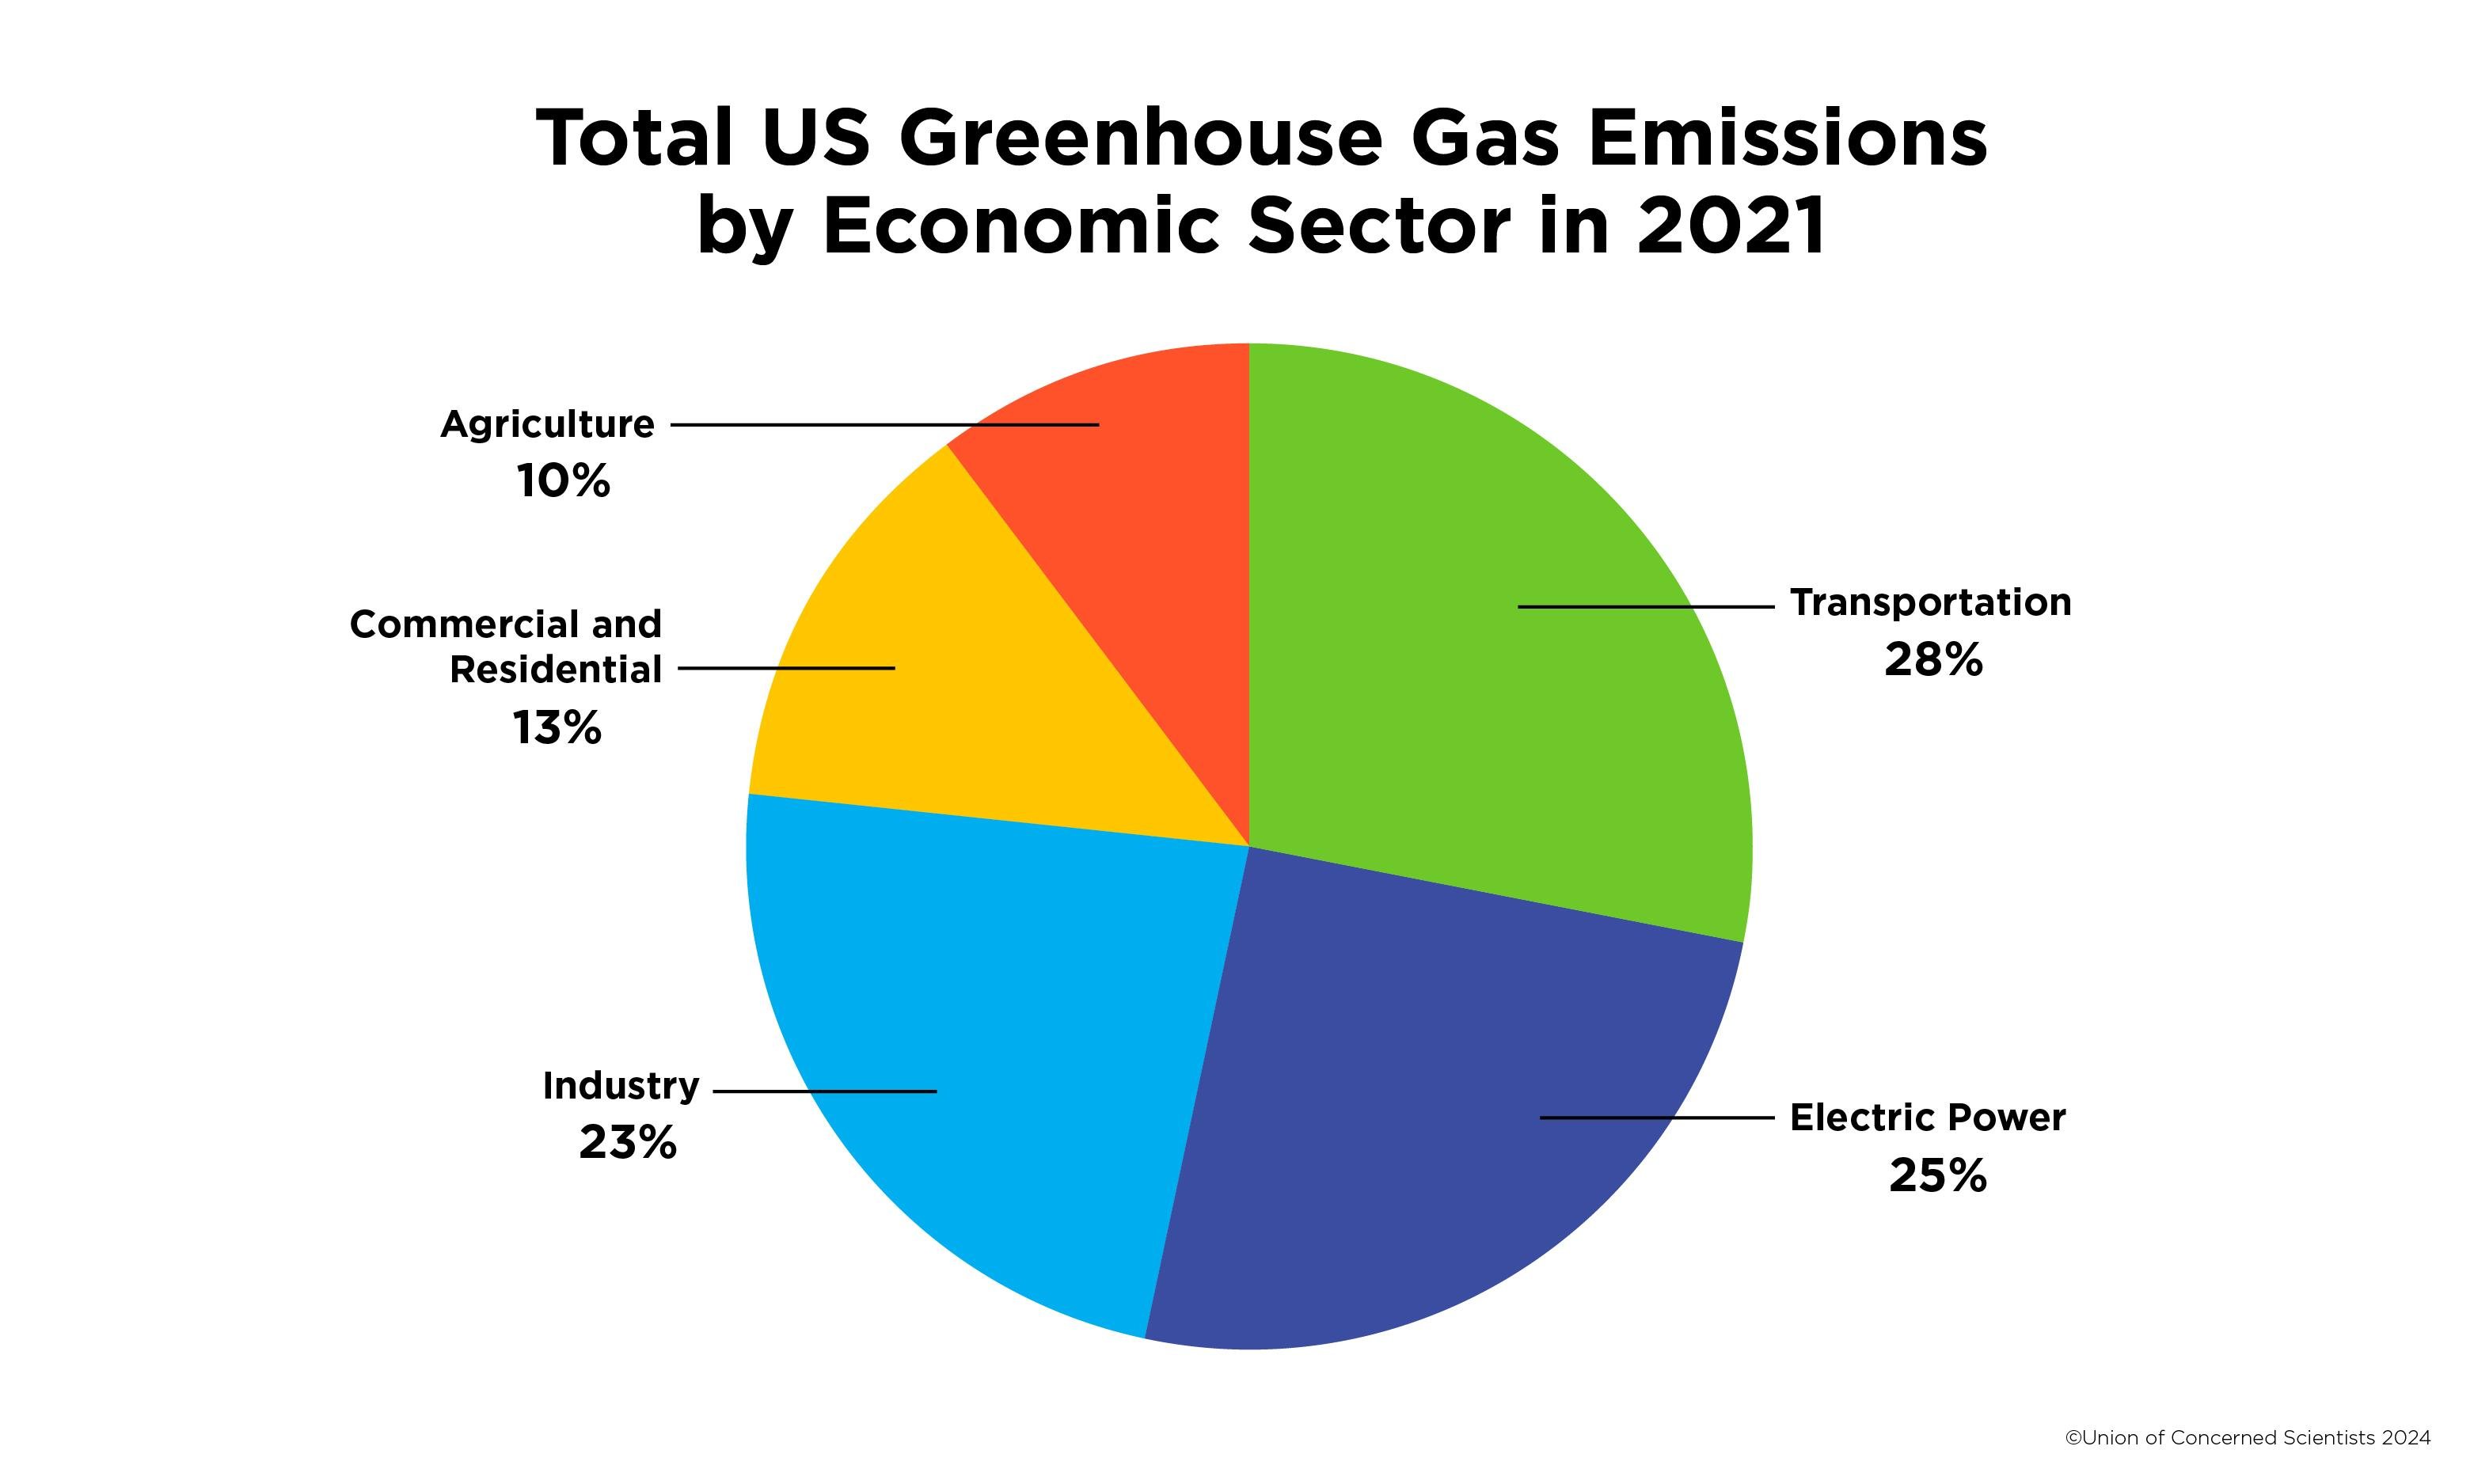 pie chart showing the breakdown of 2021 greenhouse gas emissions by economic sector